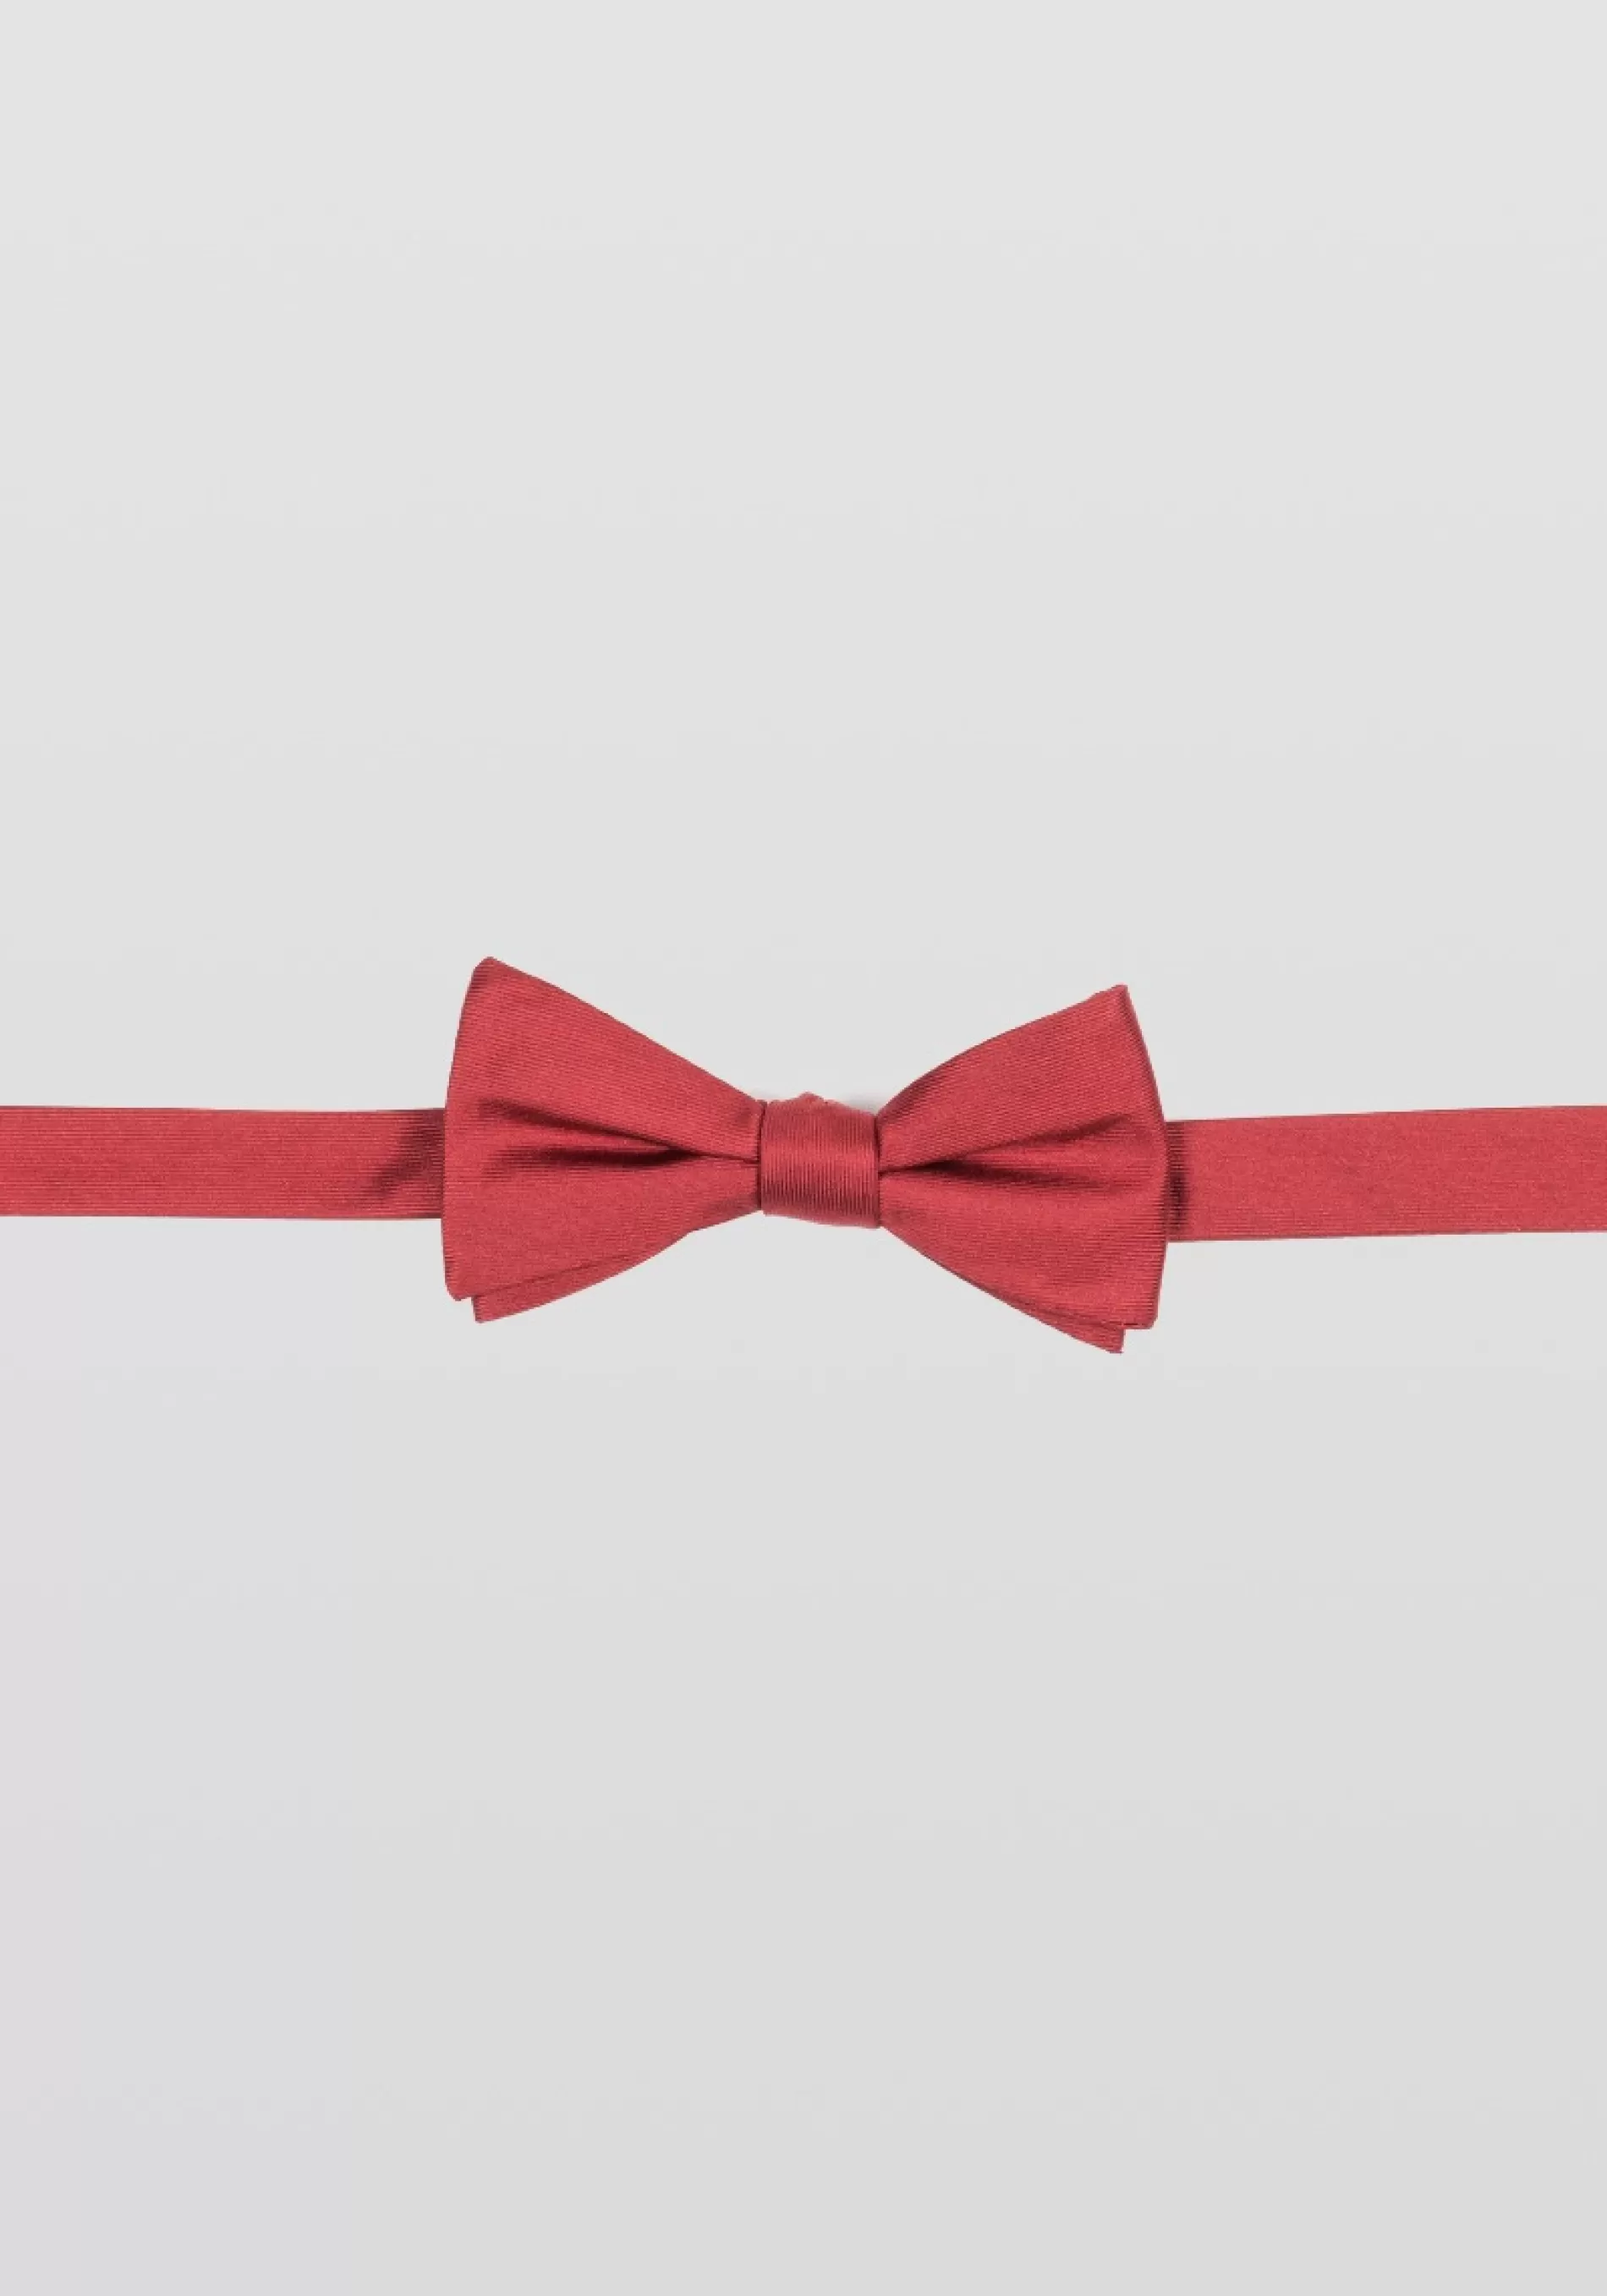 Best Sale CLASSIC BOW TIE IN PLAIN HUES Ties and Bow ties